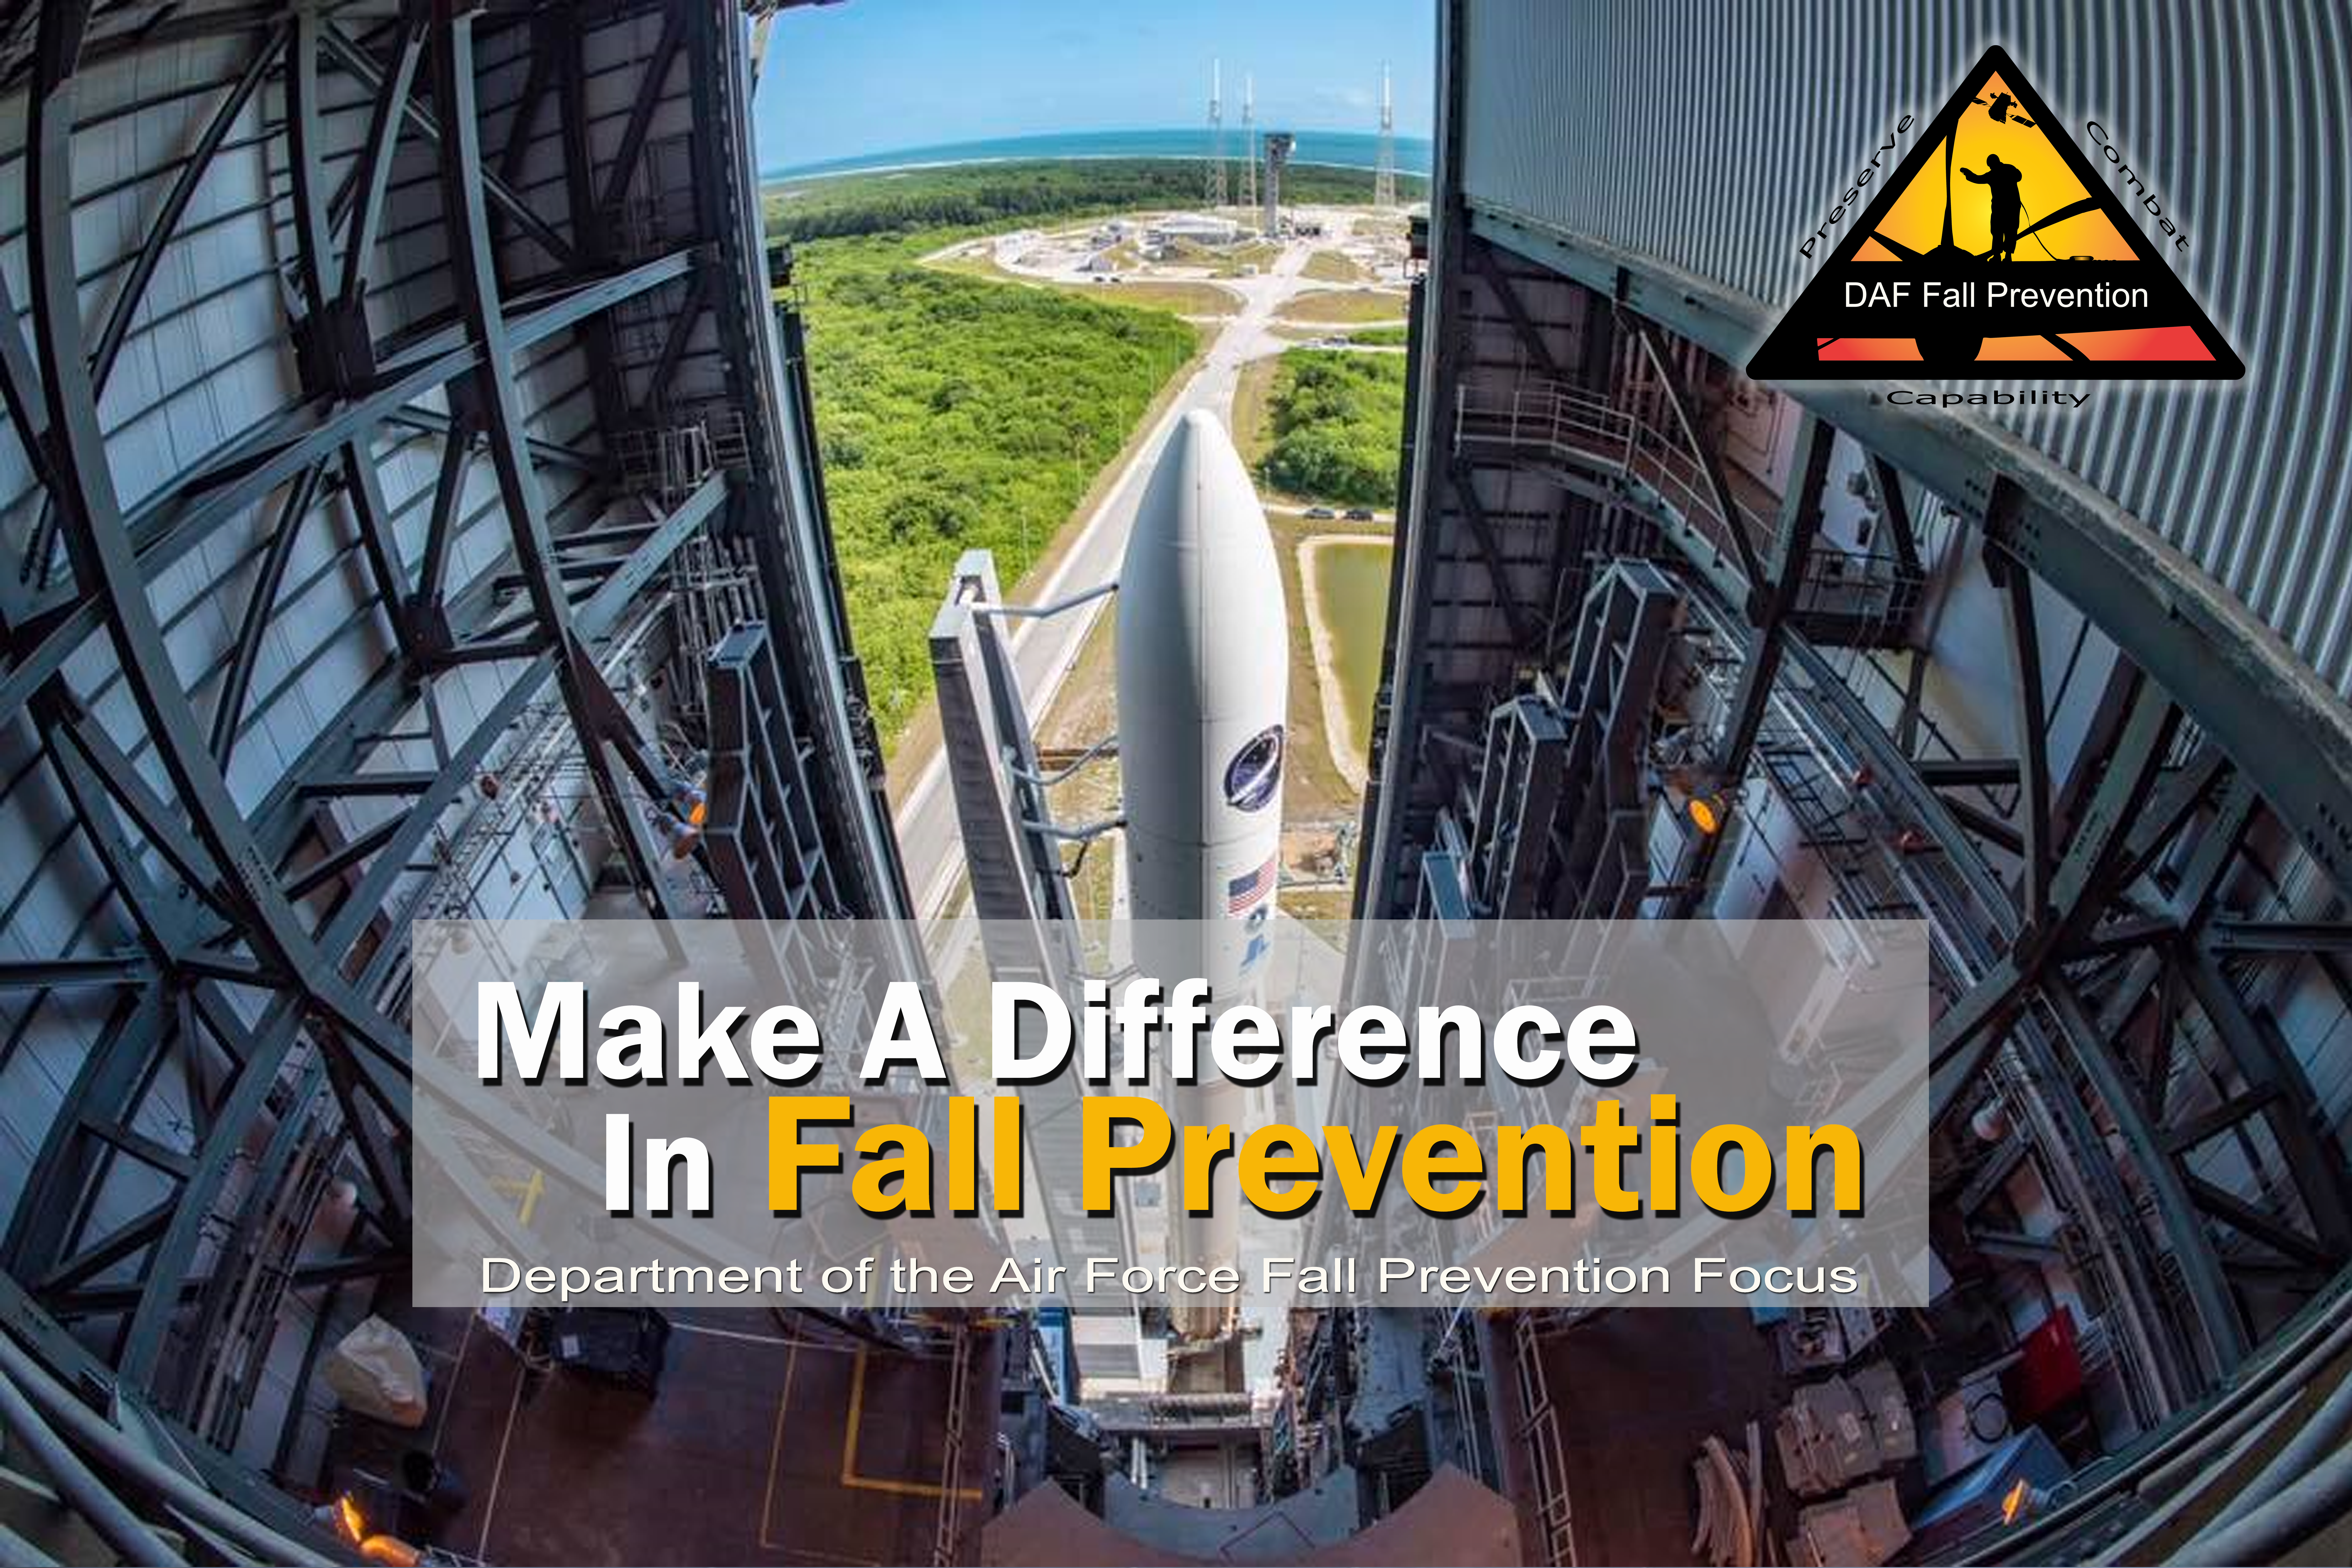 Make A Difference In Fall Prevention - Platform with rocket